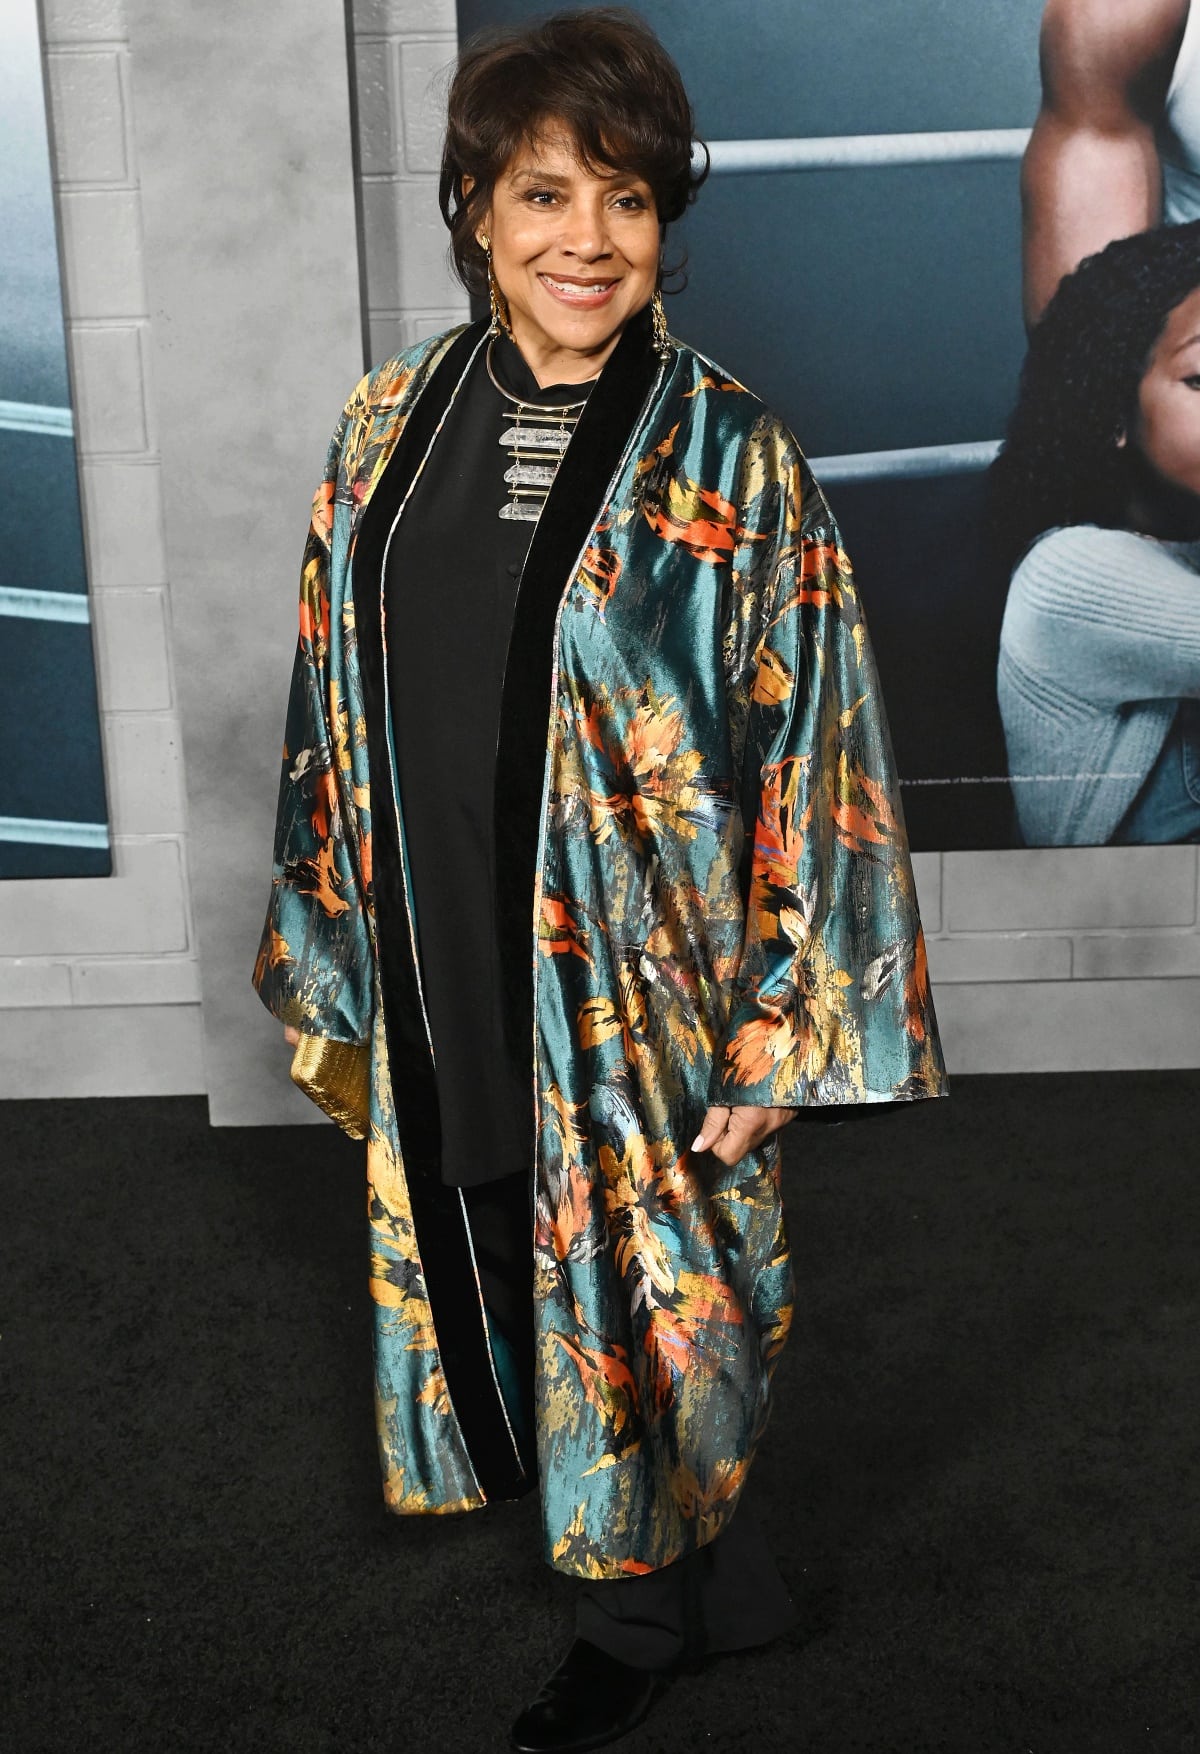 Phylicia Rashad in a floral-printed kimono at the Los Angeles premiere of Creed III